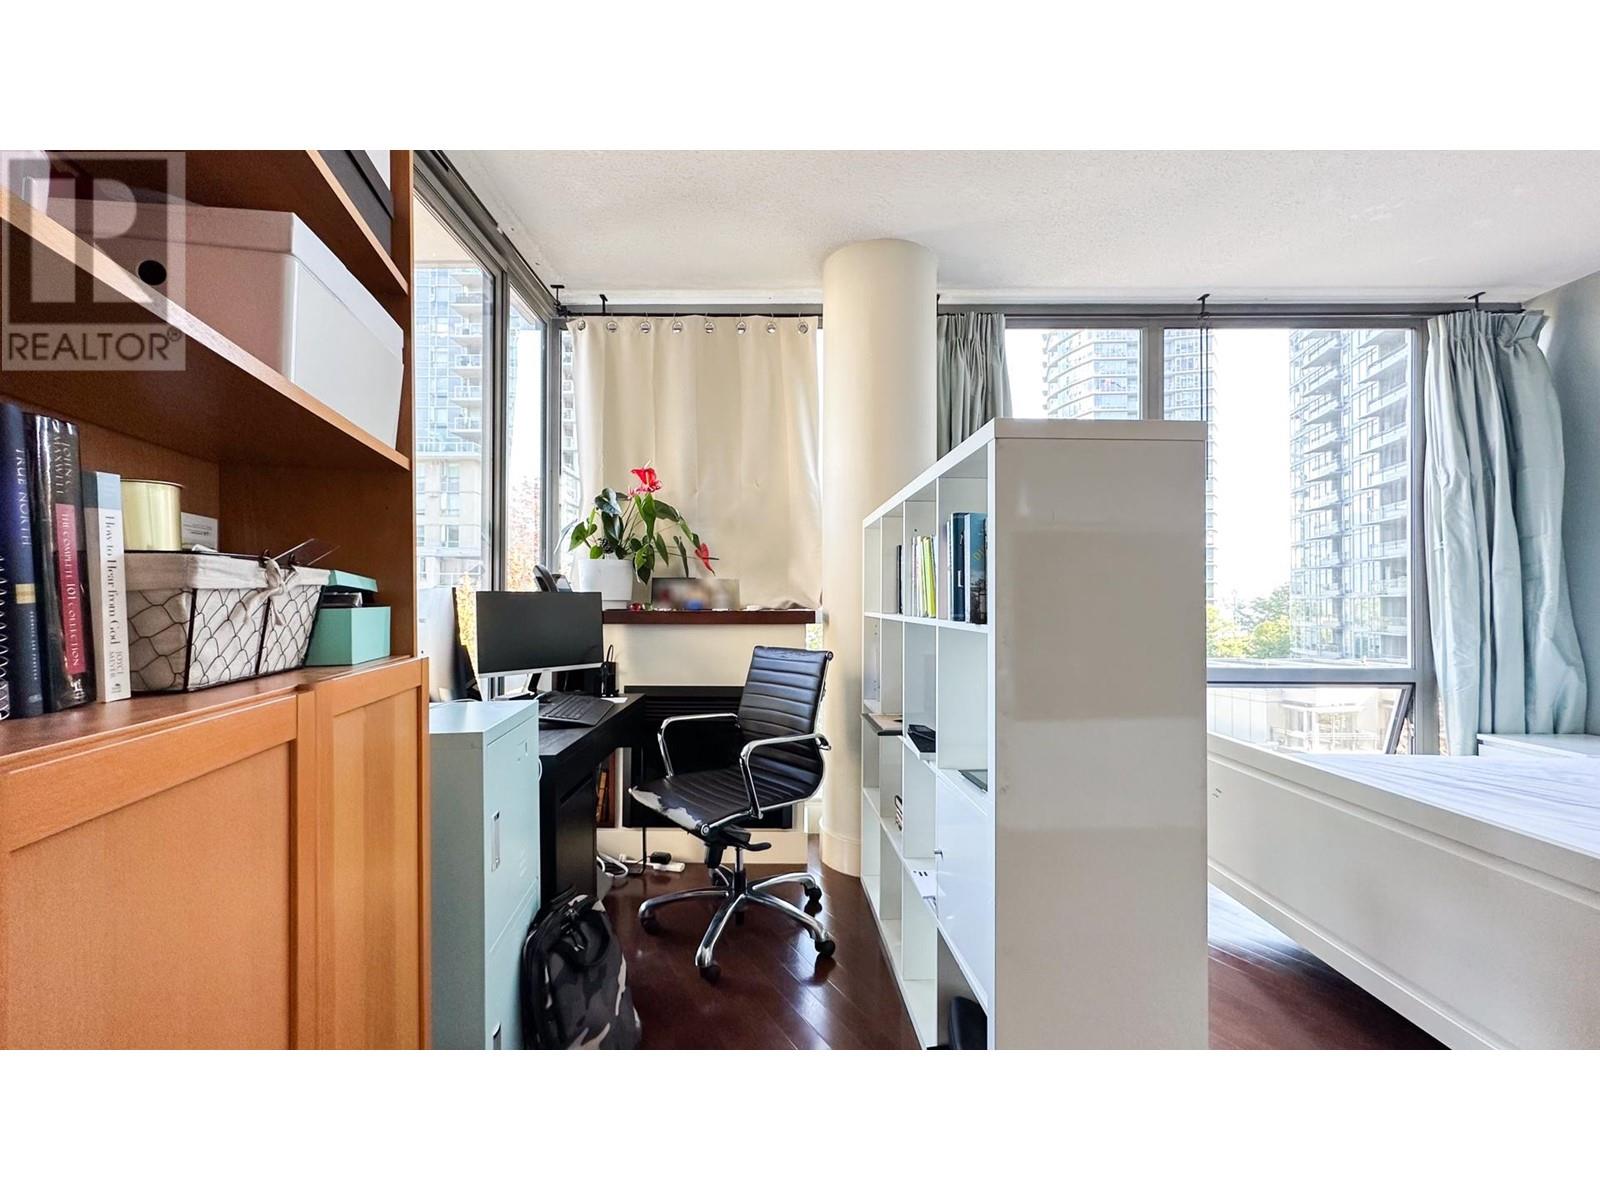 Listing Picture 18 of 23 : 402 1228 W HASTINGS STREET, Vancouver / 溫哥華 - 魯藝地產 Yvonne Lu Group - MLS Medallion Club Member